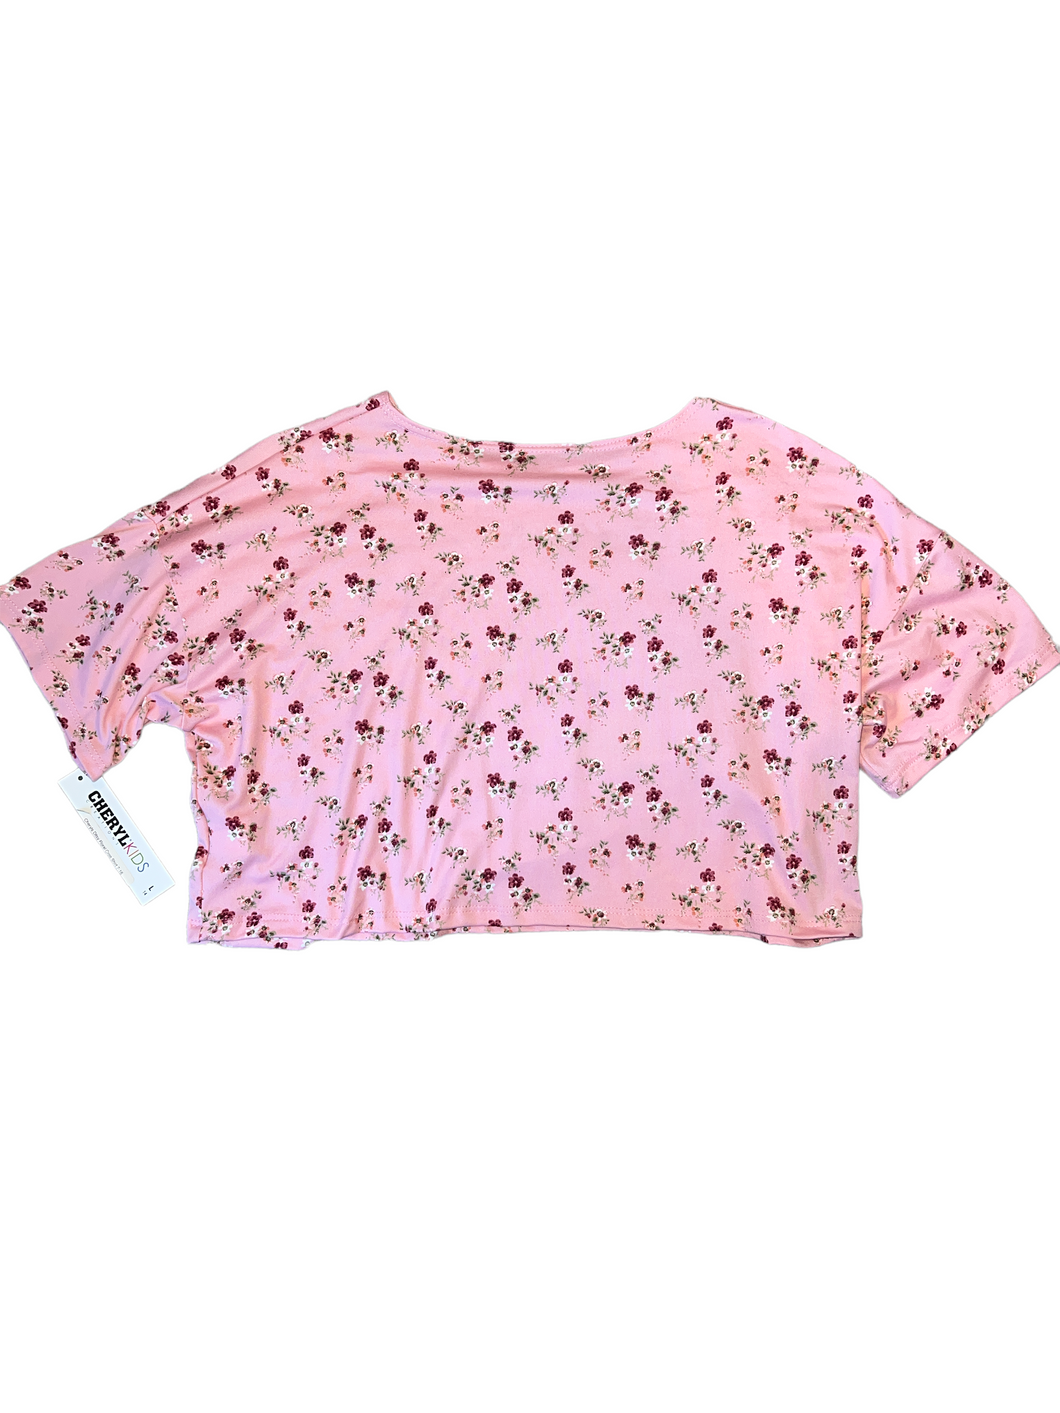 Cheryl Creations girls ditsy floral crop top NEW